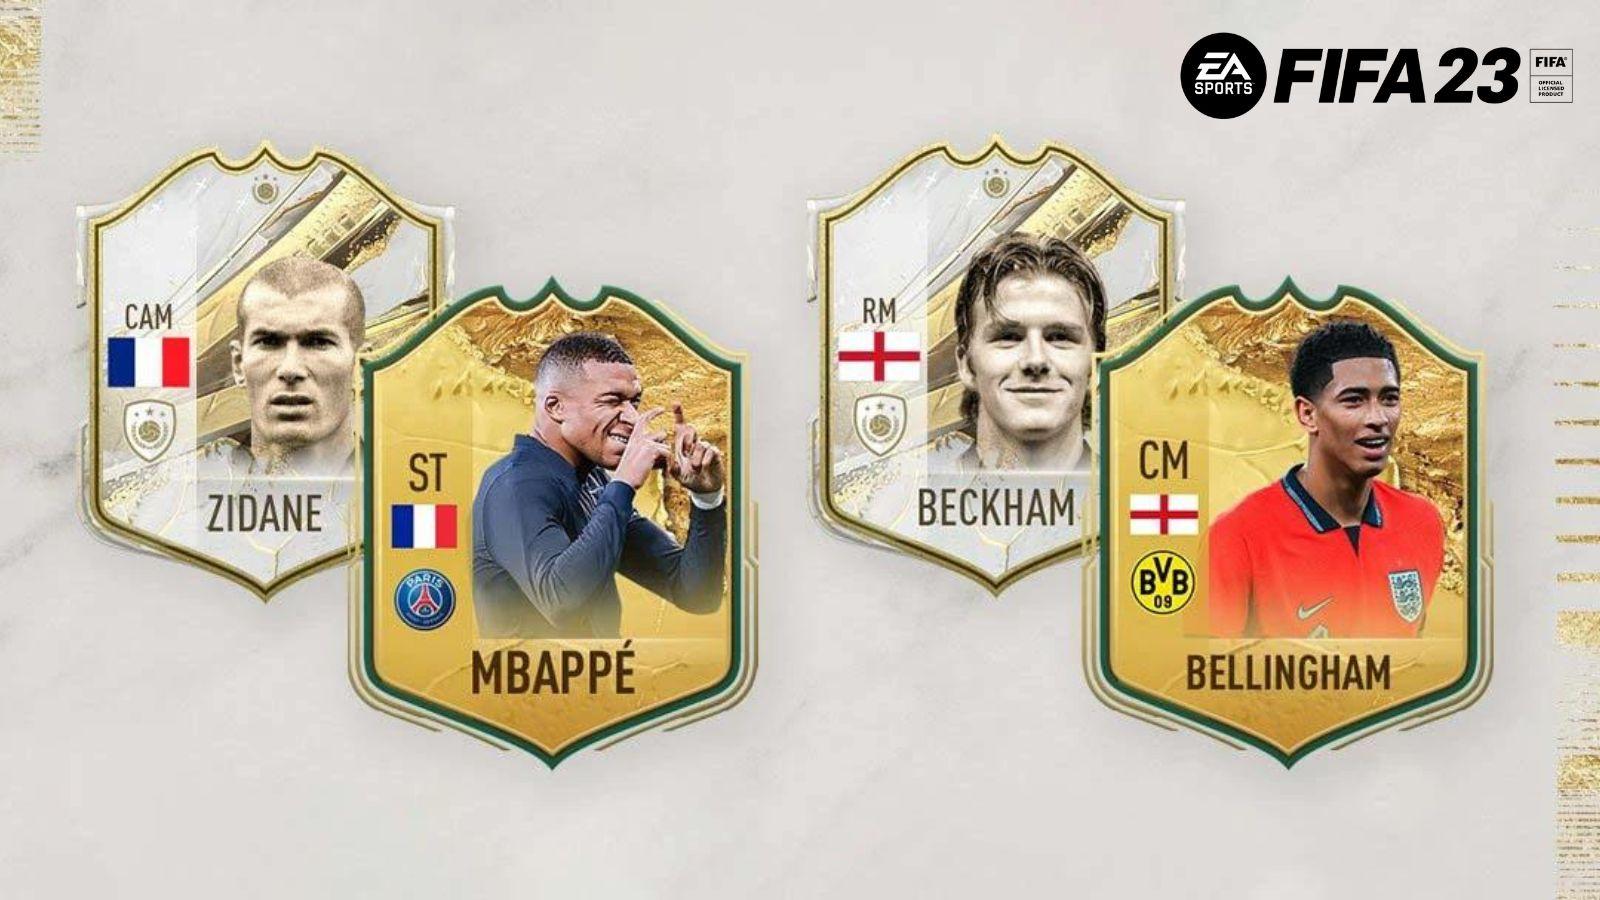 First leaked Path to Glory card… : r/fut